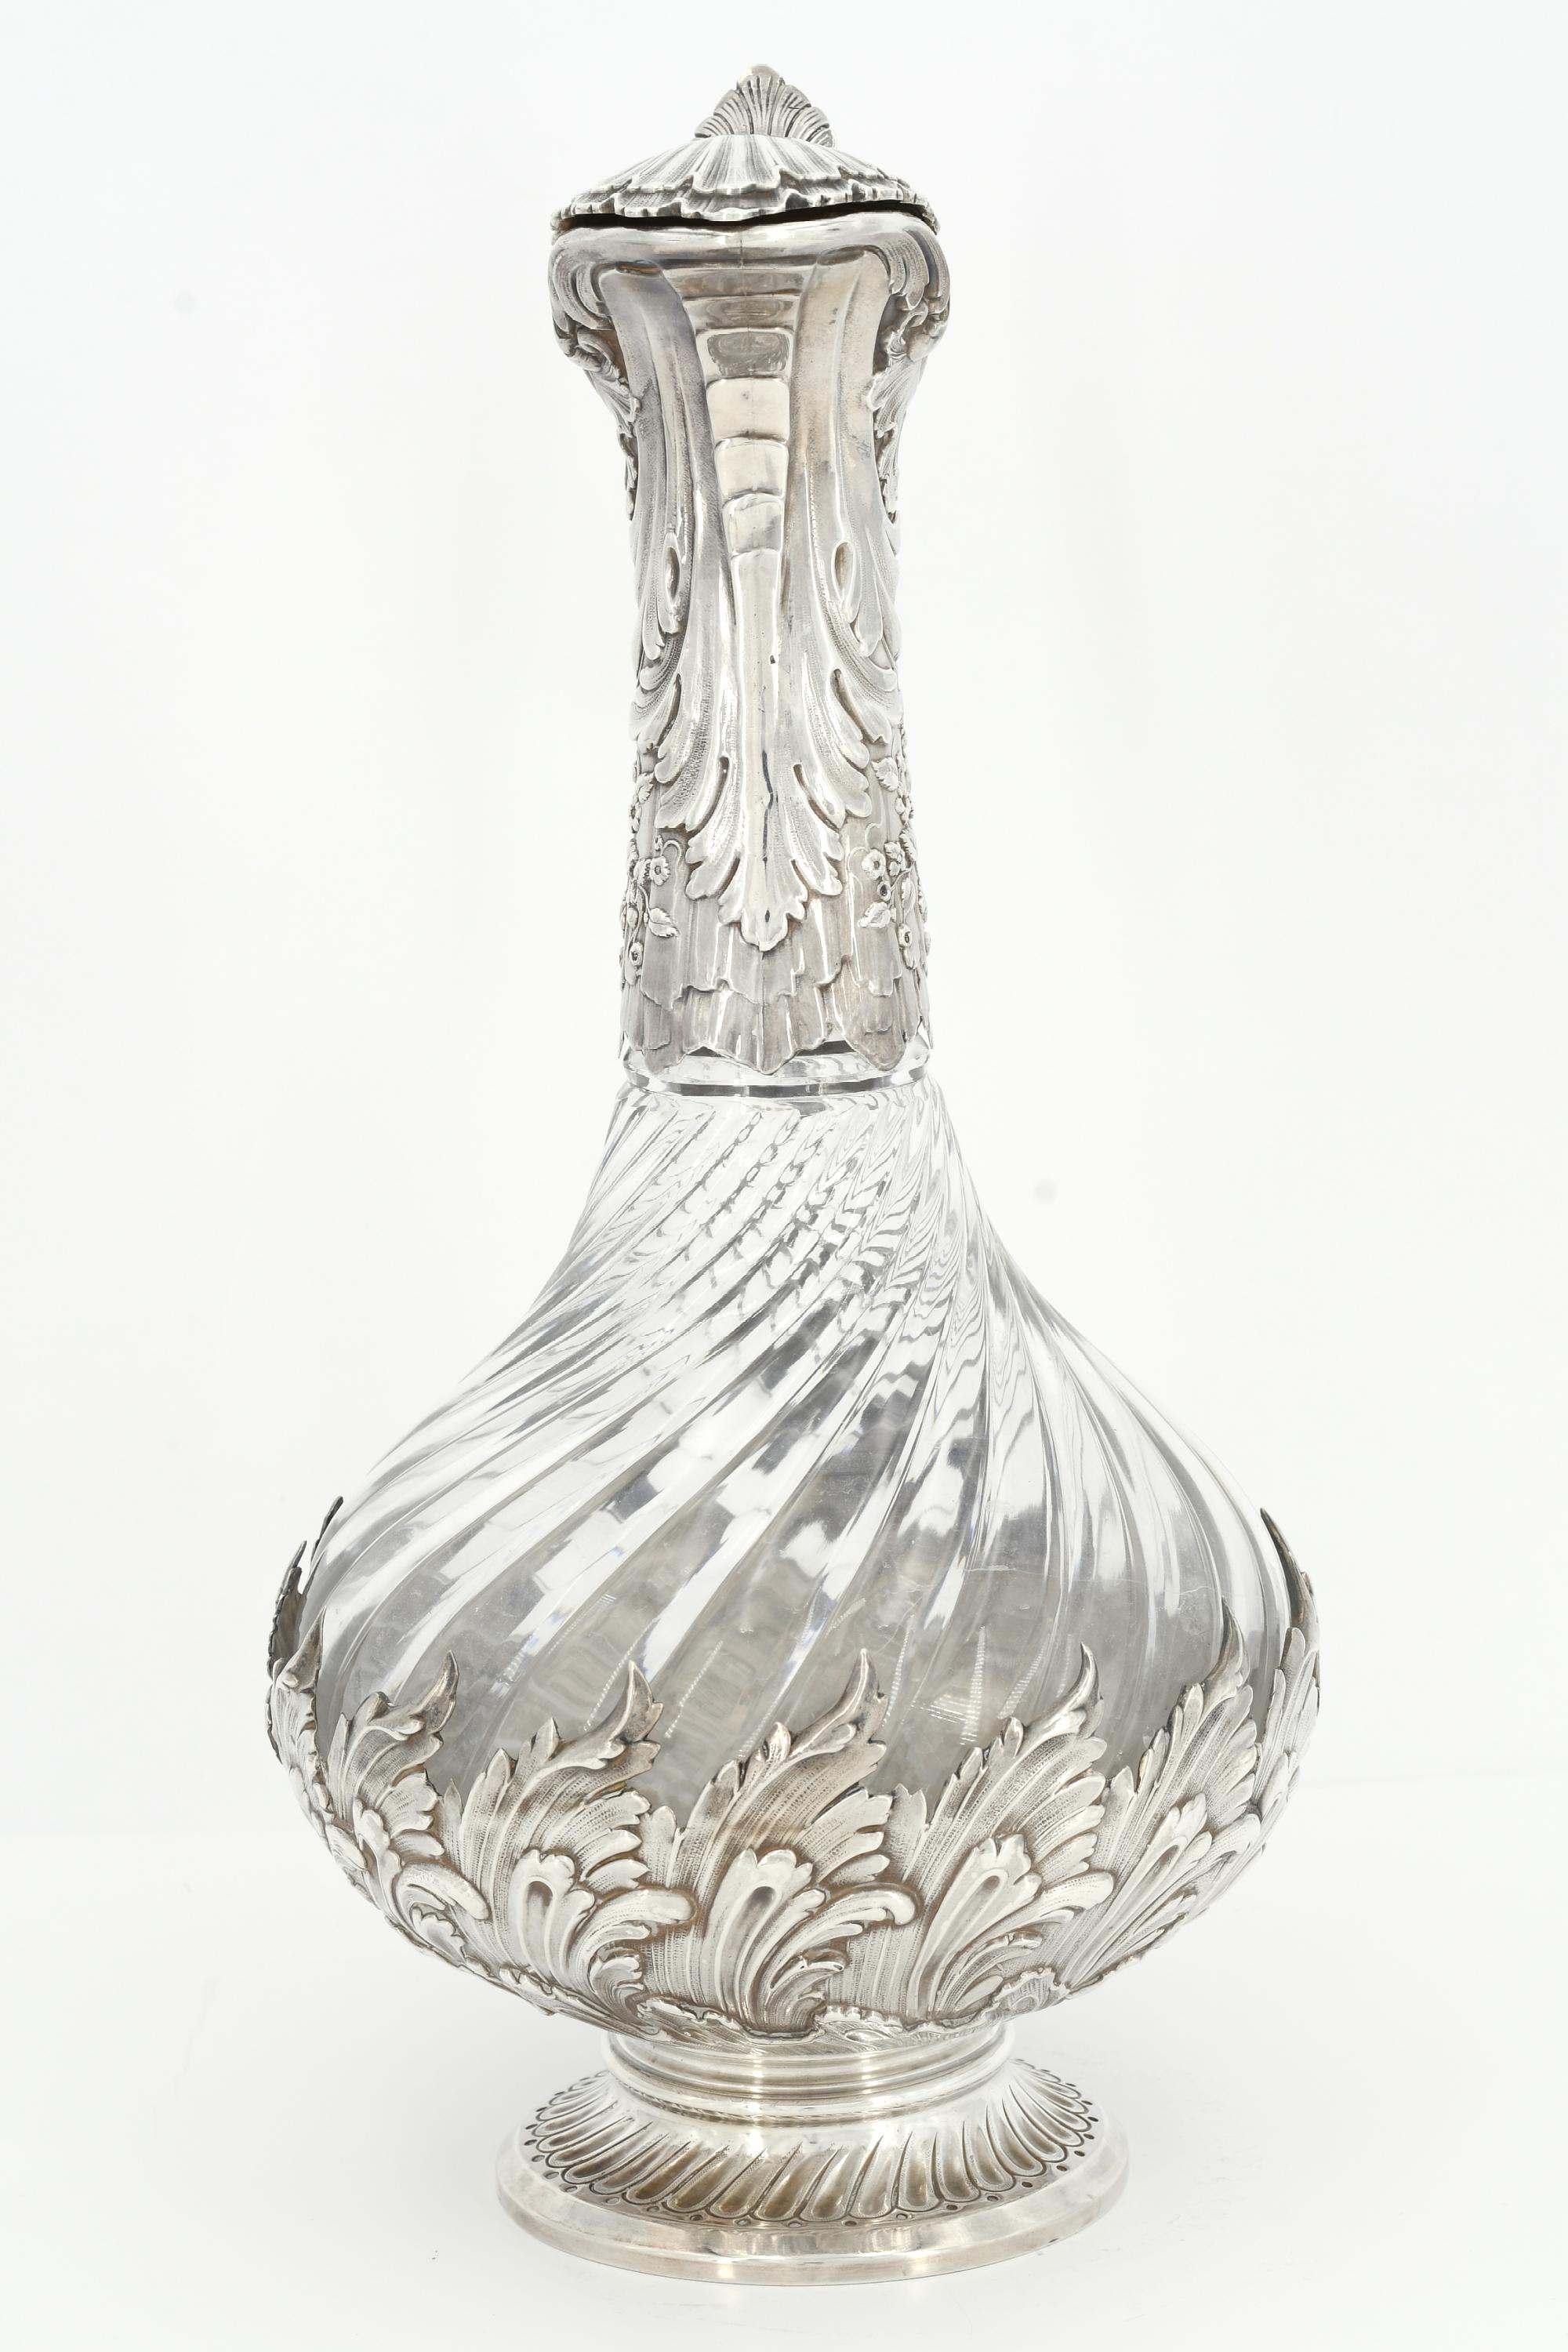 Rococo style silver and glass carafe - Image 5 of 8